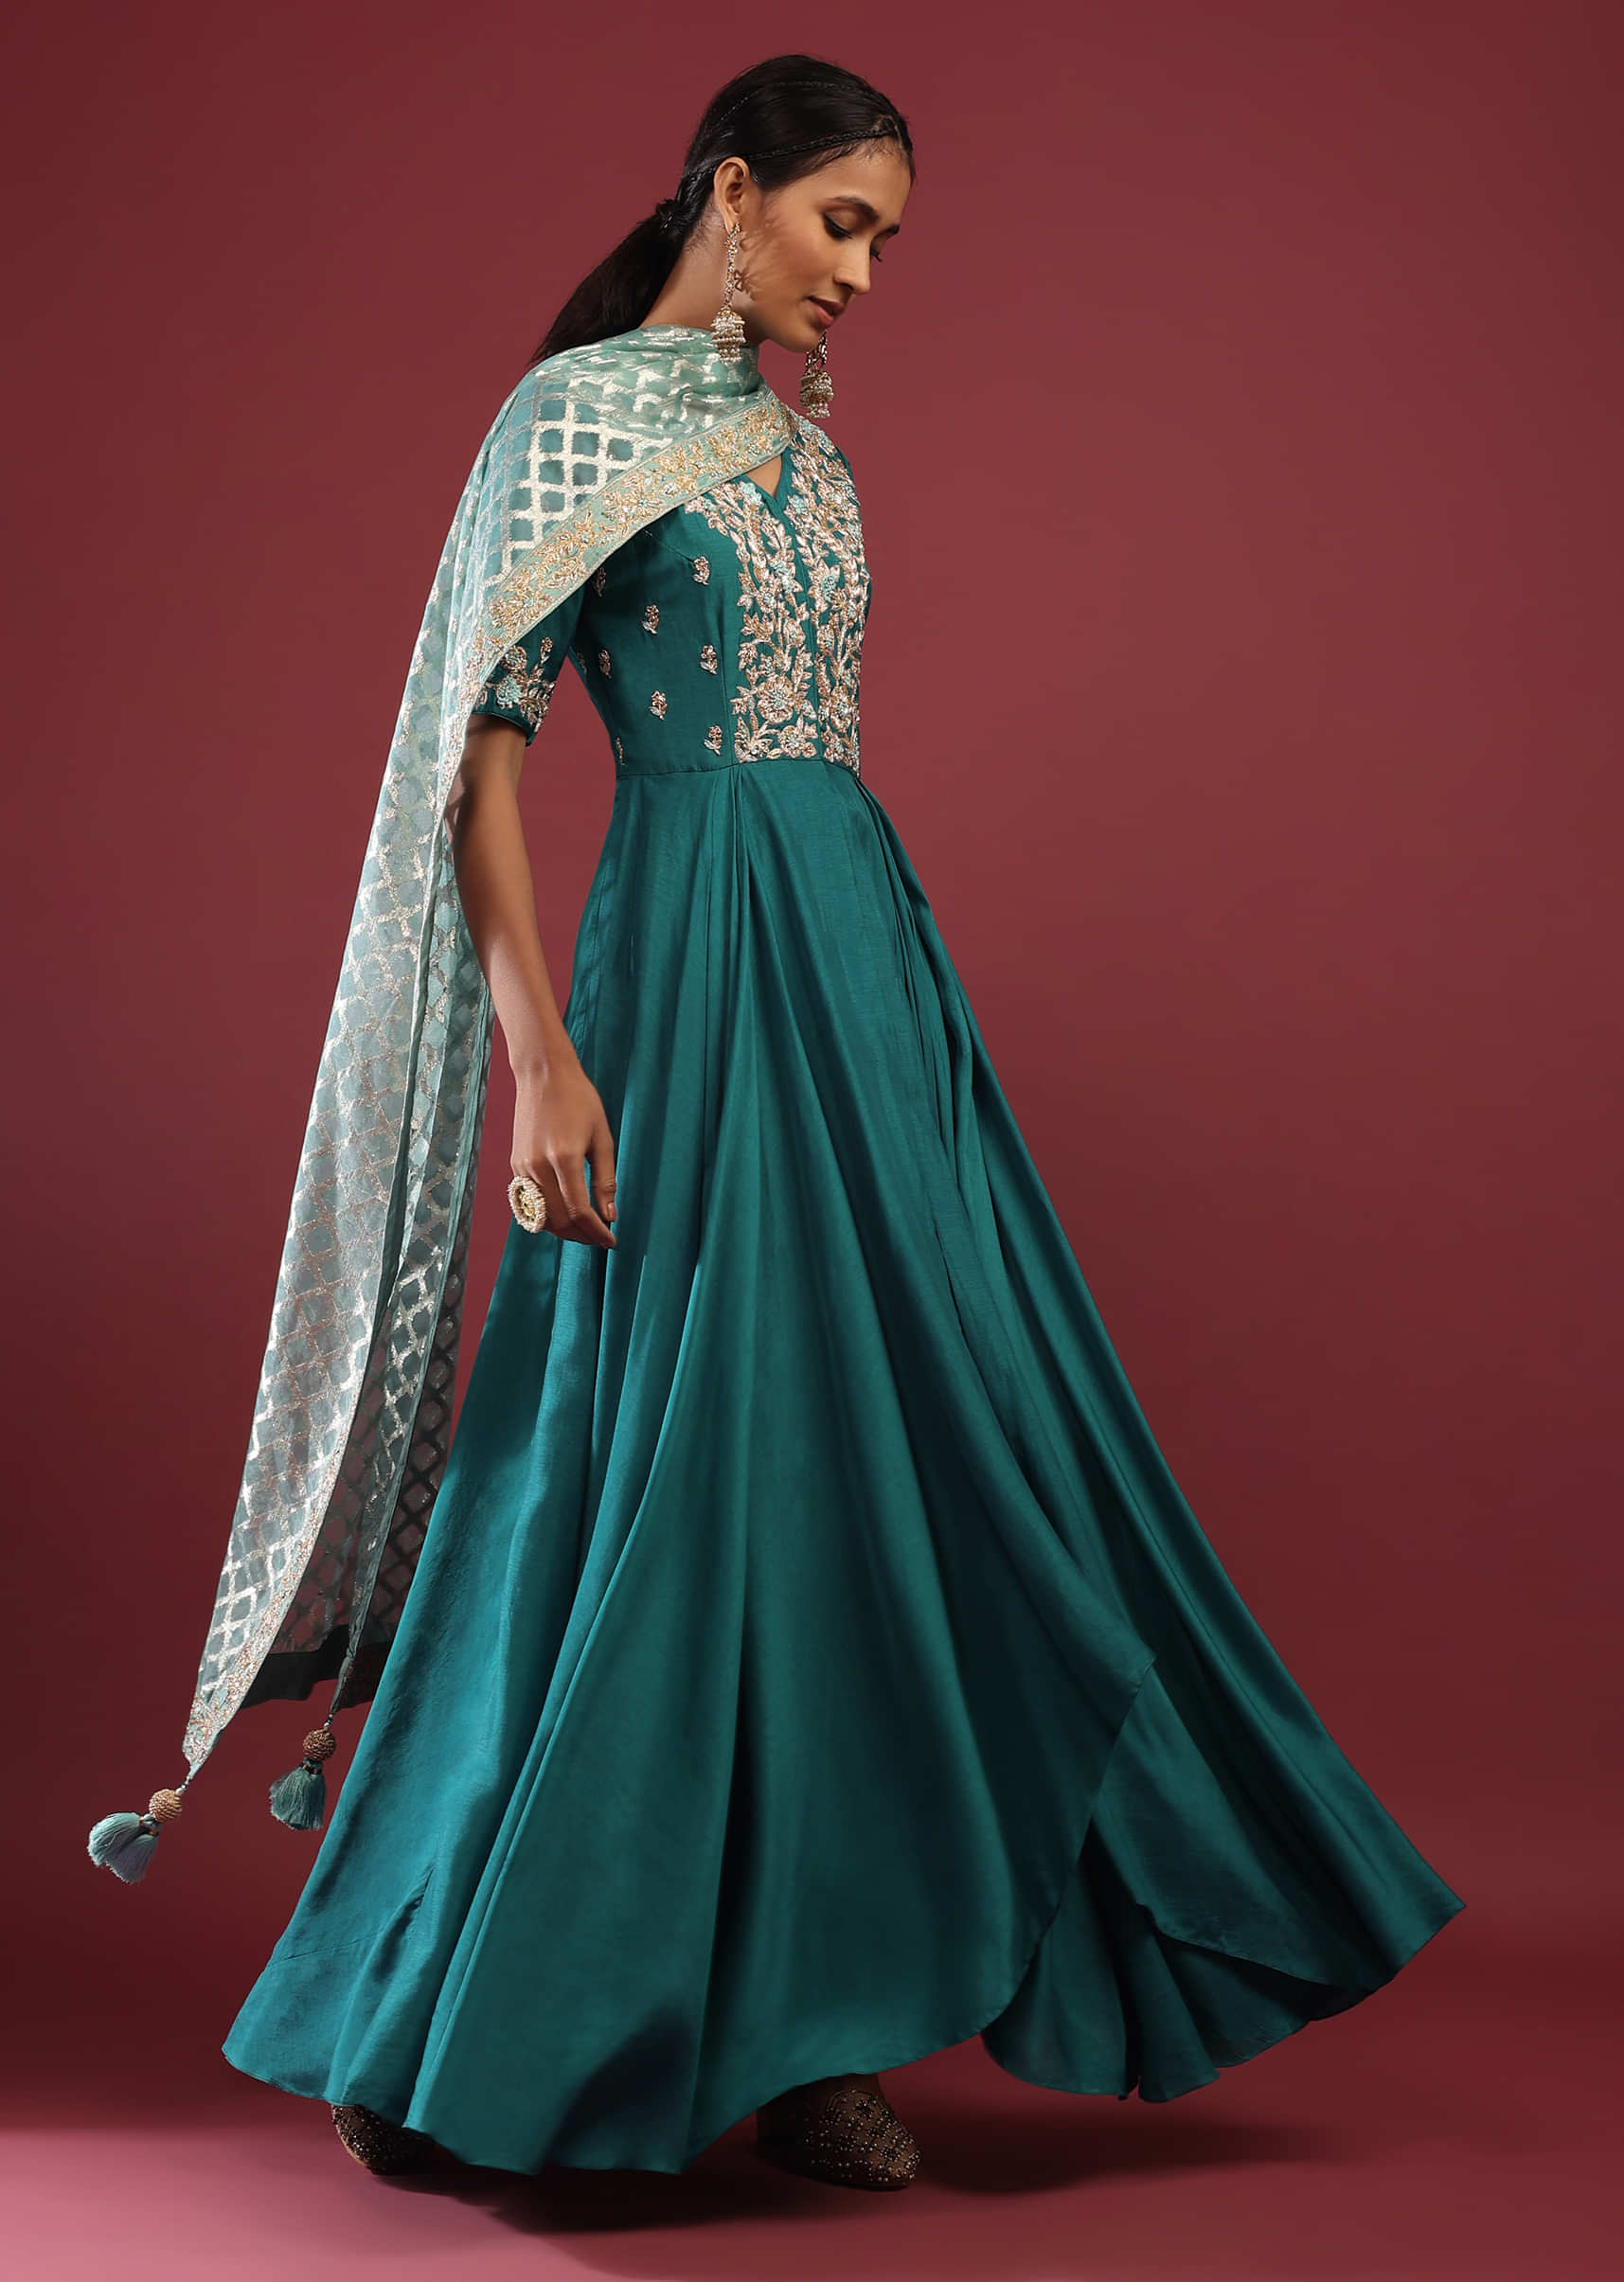 Teal High Low Anarkali Suit With A Front Slit, Zardosi Embroidered Flowers And Mint Lurex Dupatta